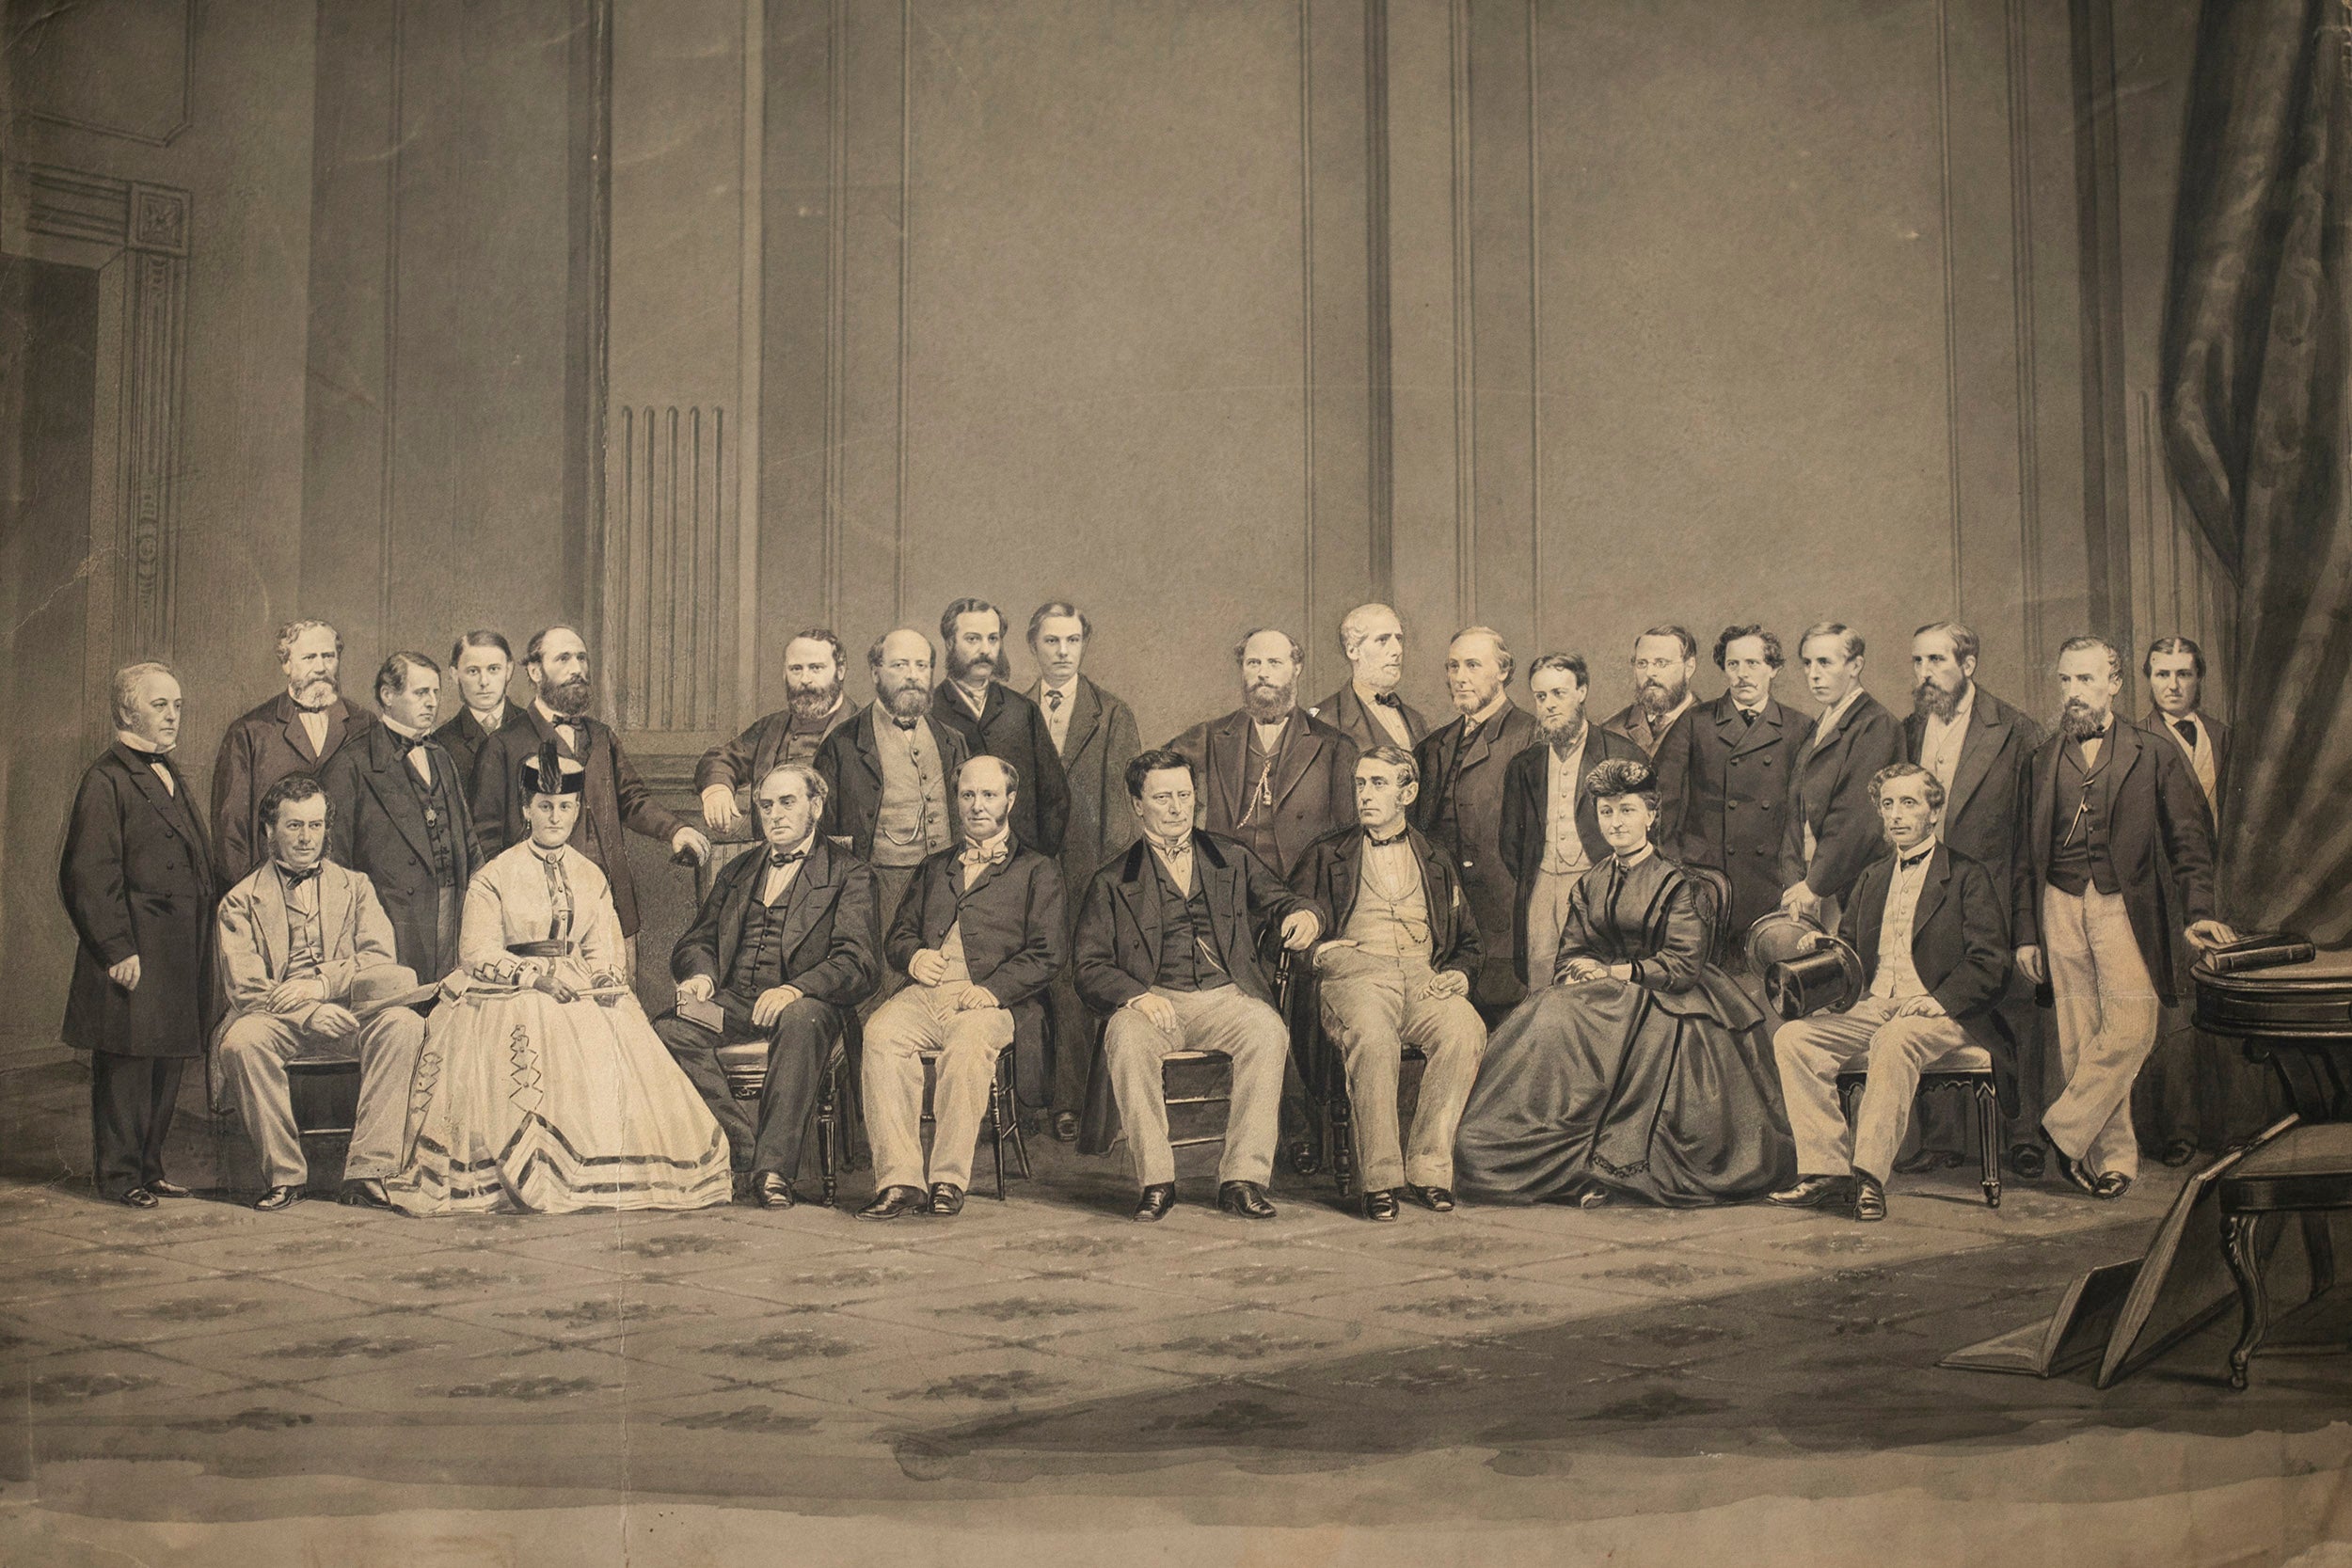 Group portrait from 1865.